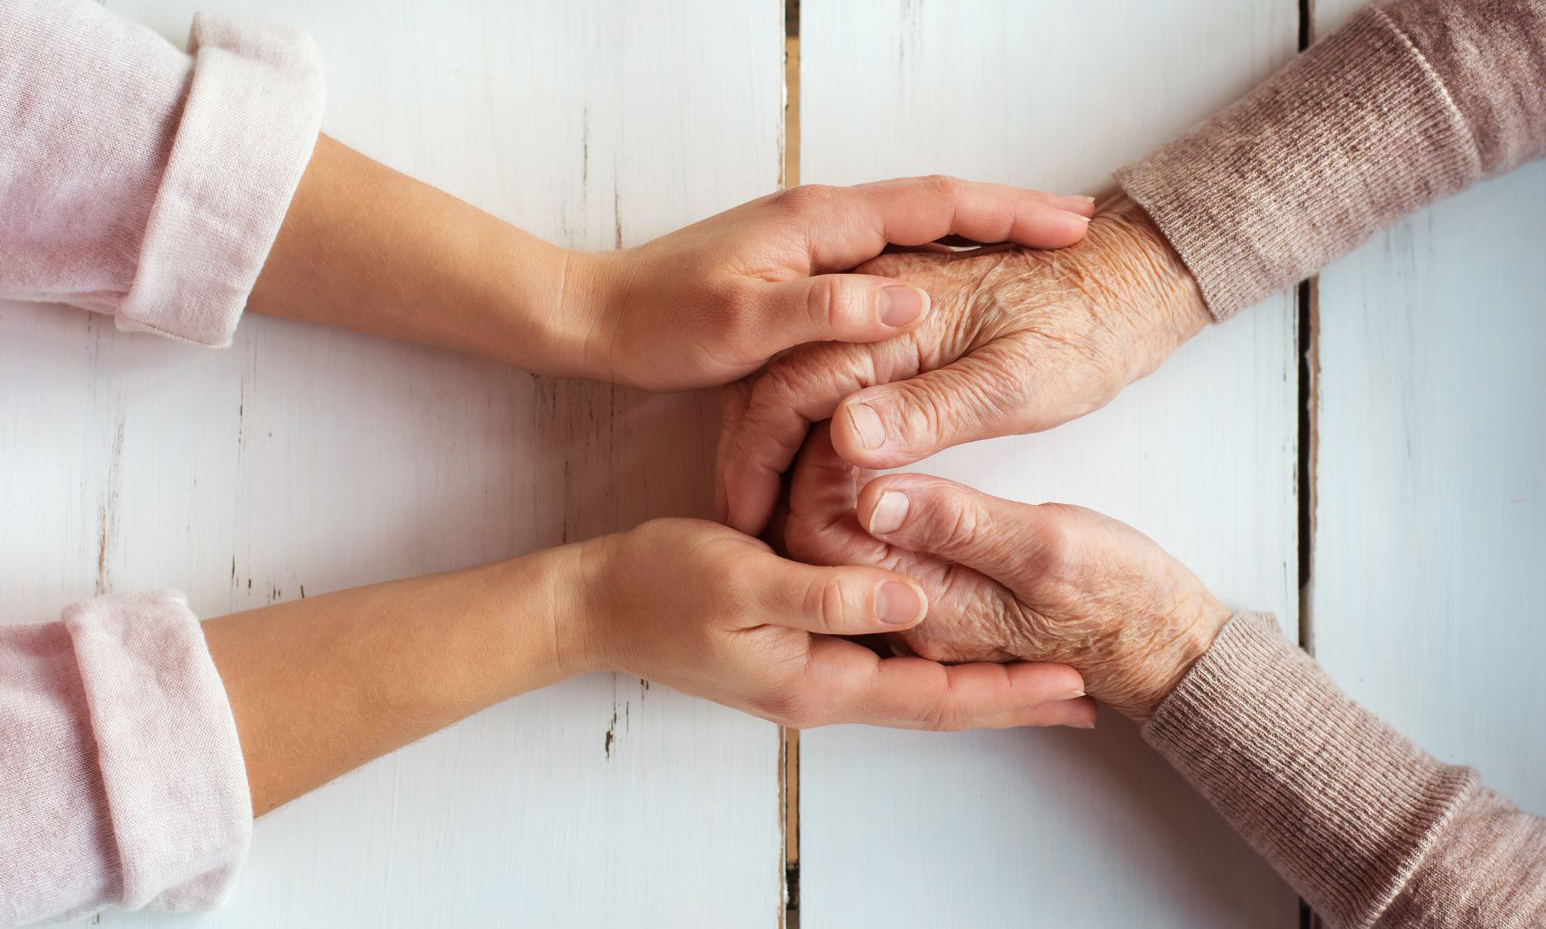 home caregiver holds the hands of client coping with Alzheimer's disease.